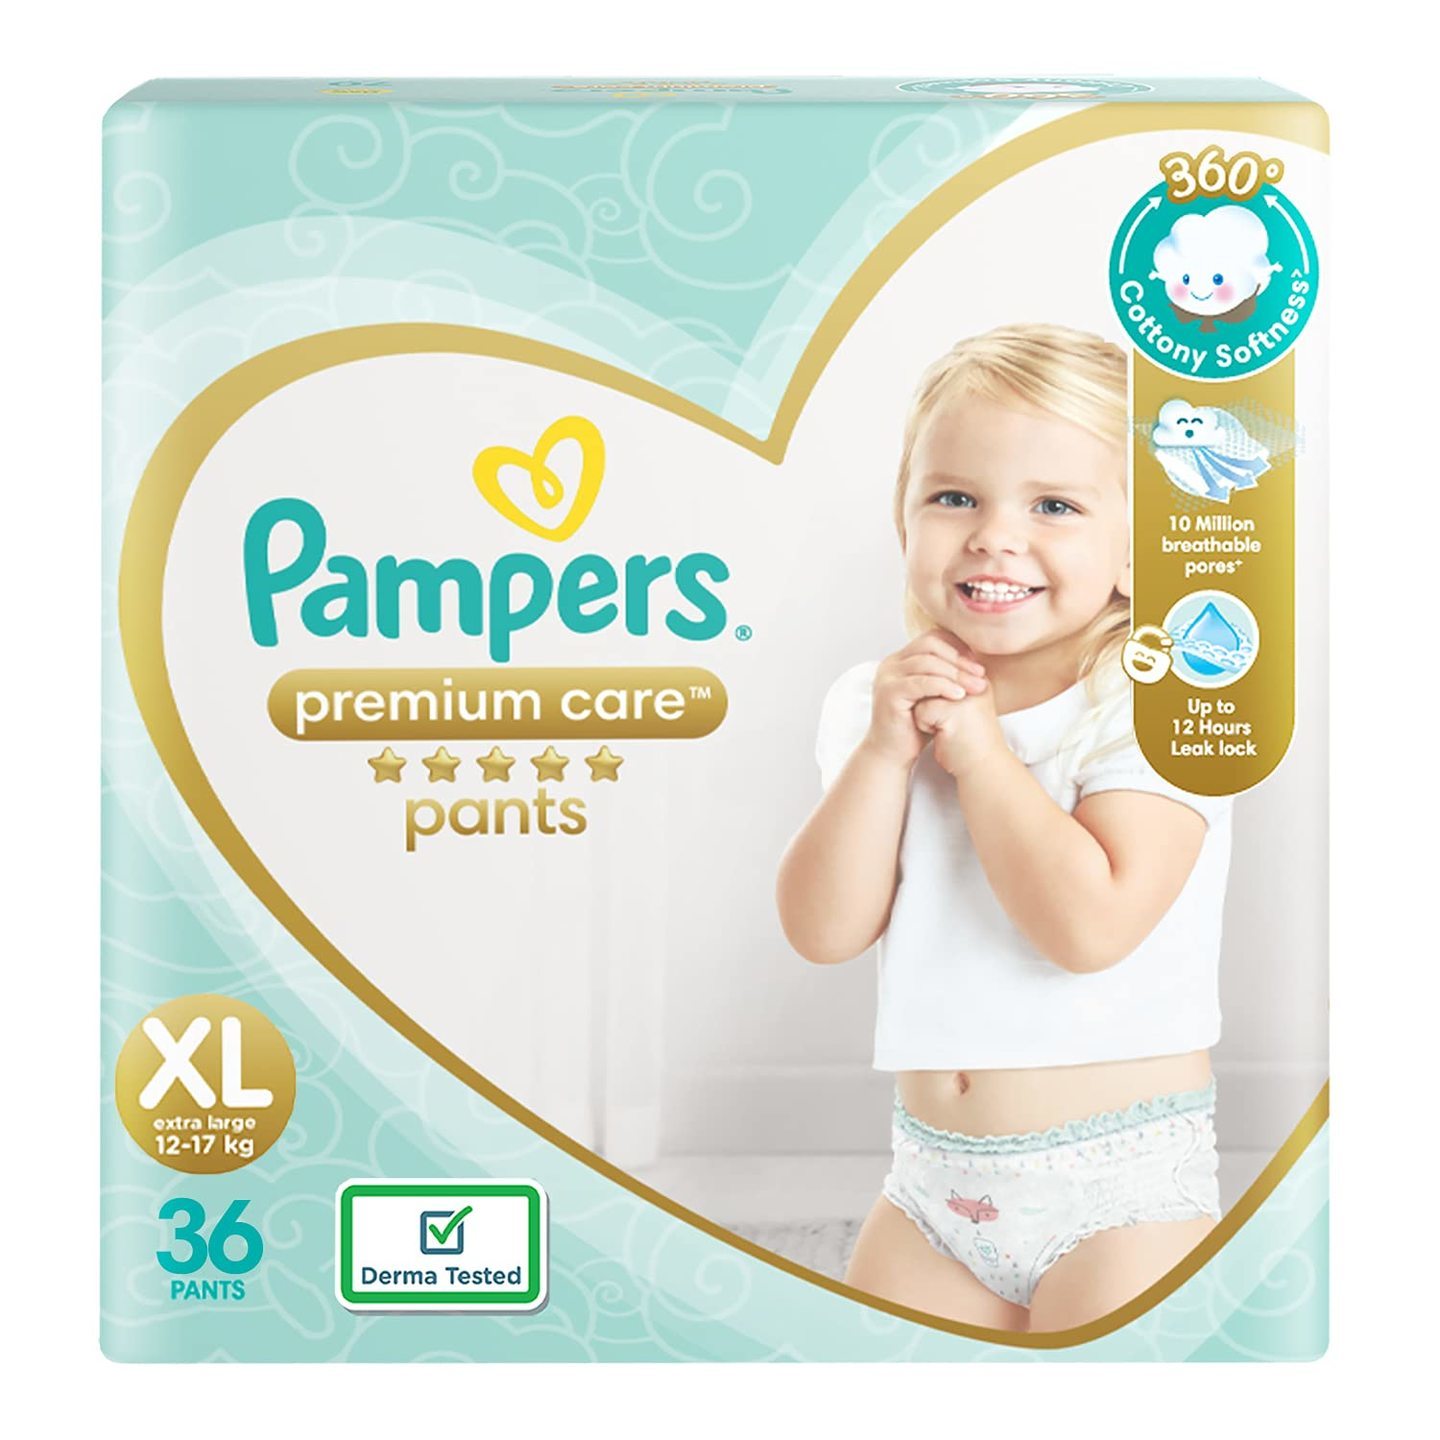 Pampers Premium Care Pants XL 36 Count Softest ever Pampers Pants